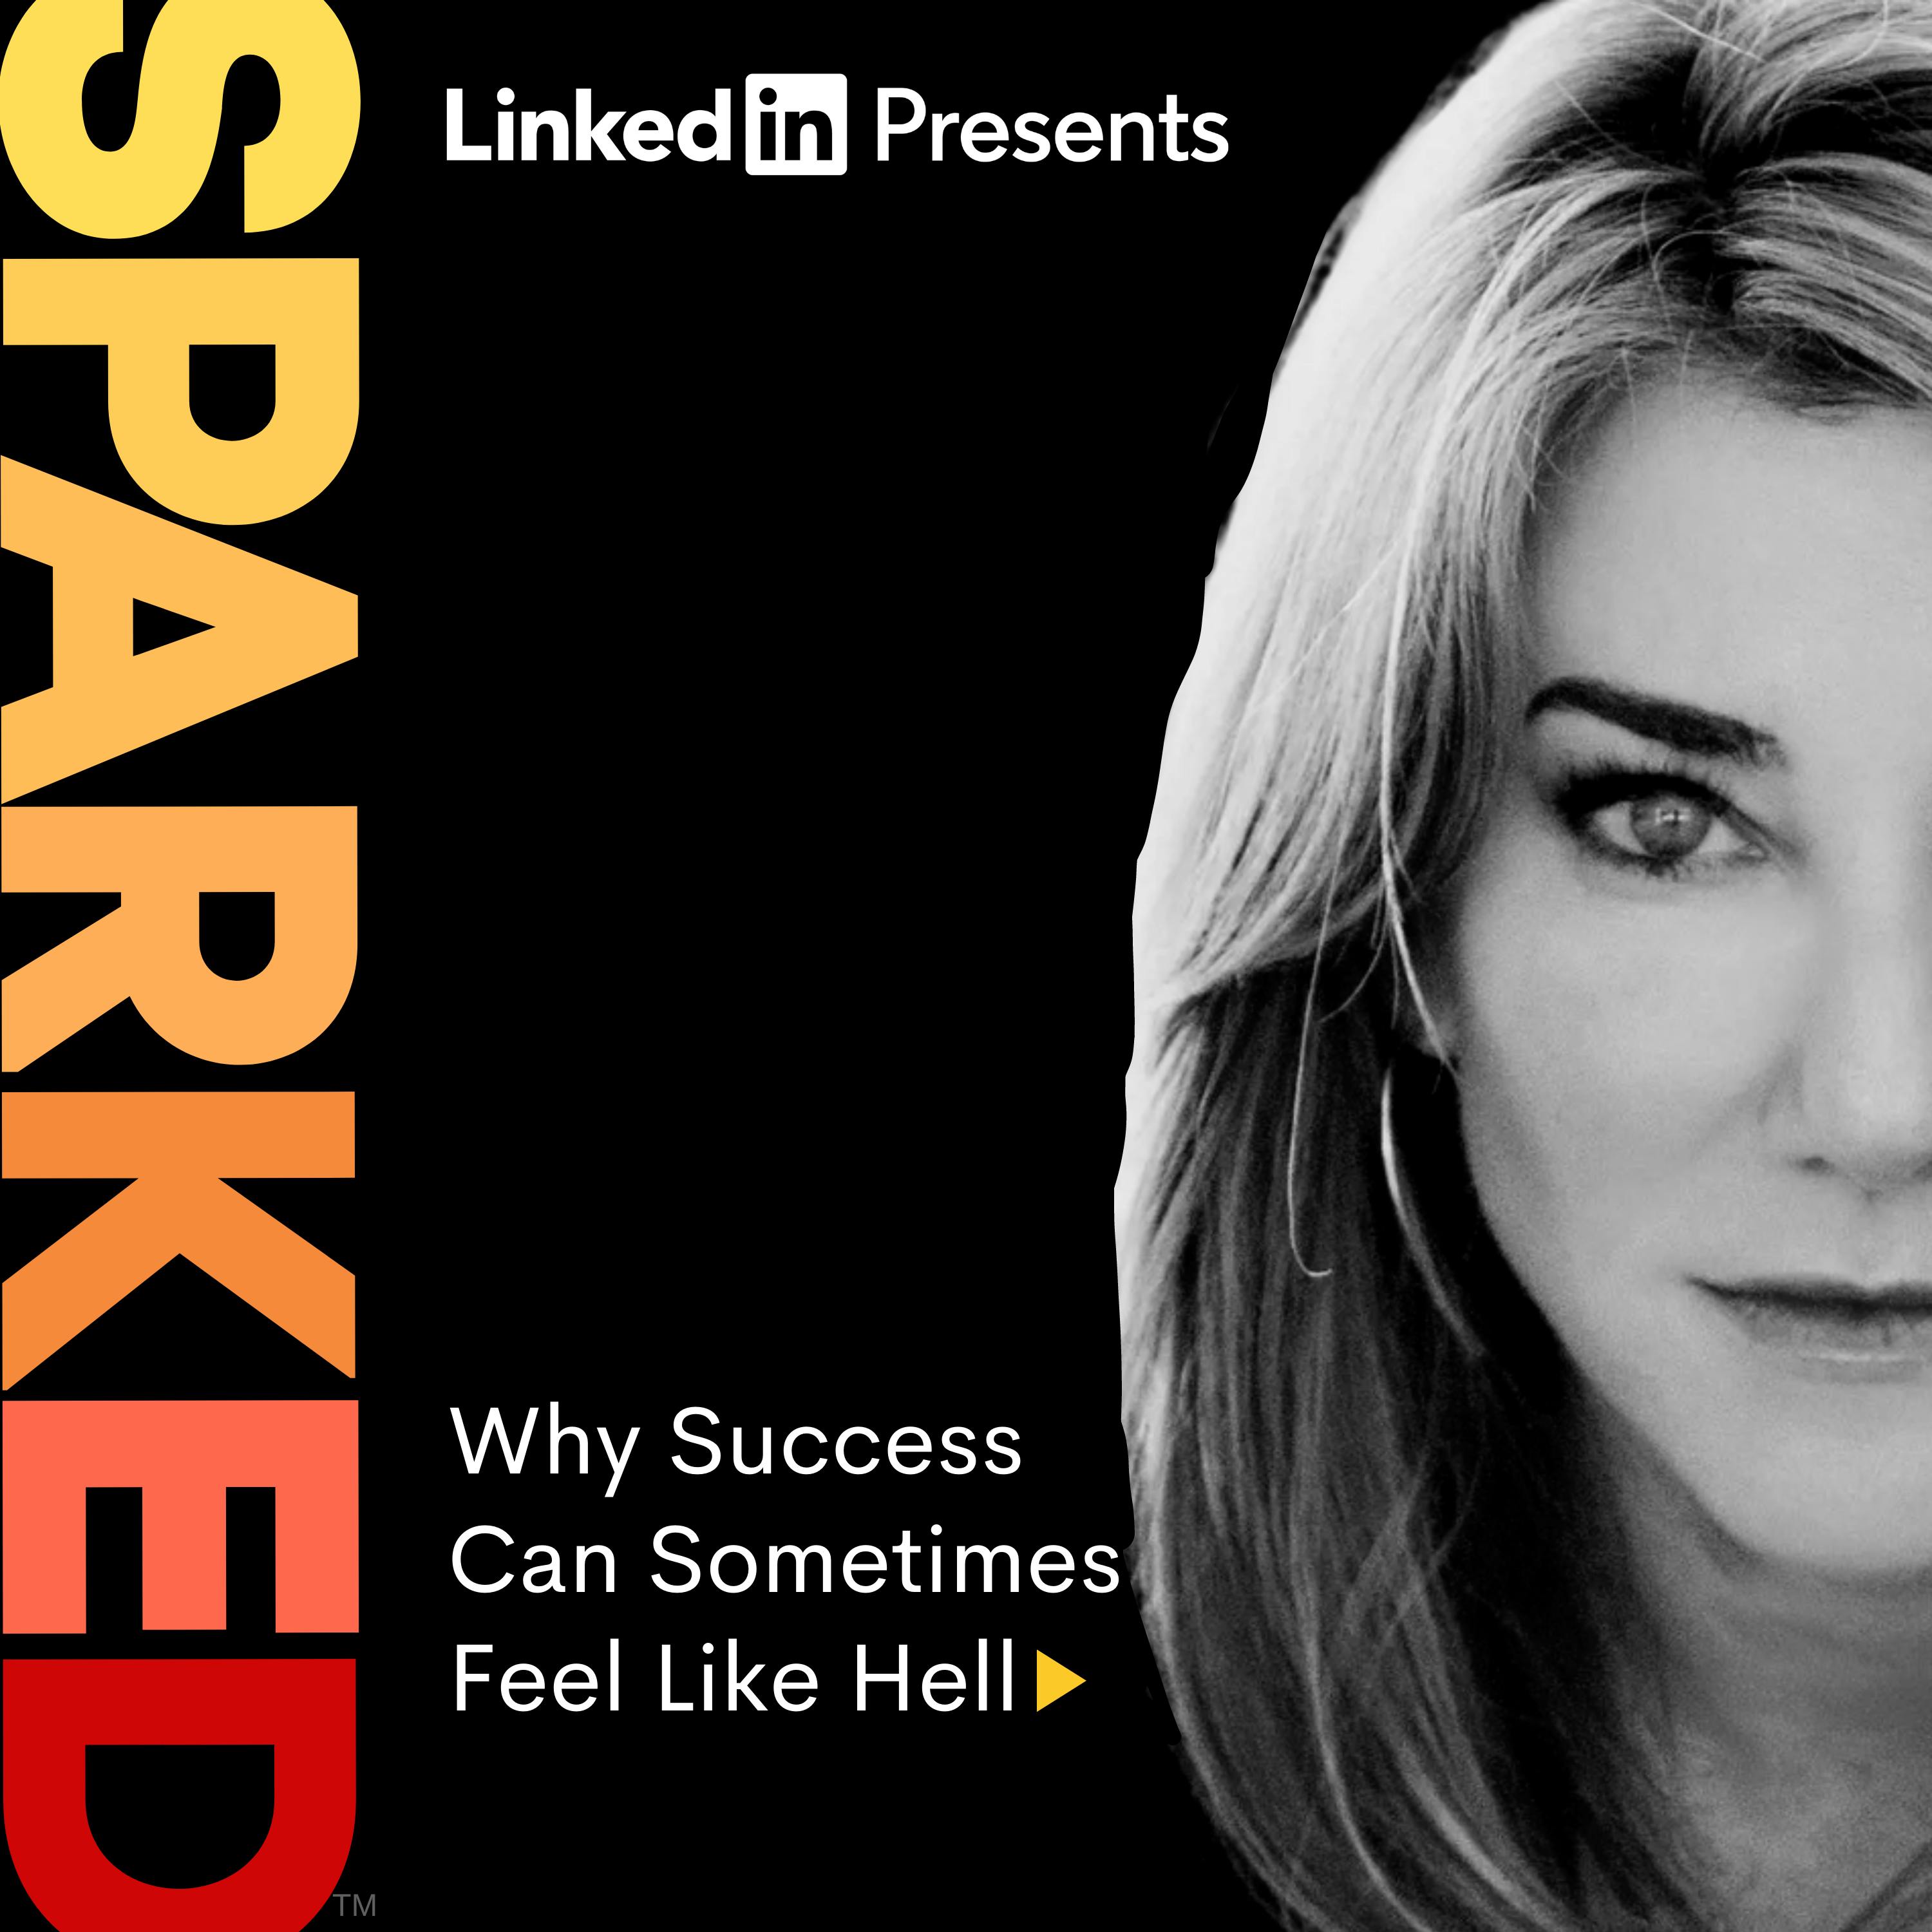 Why Success Can Sometimes Feel Like Hell